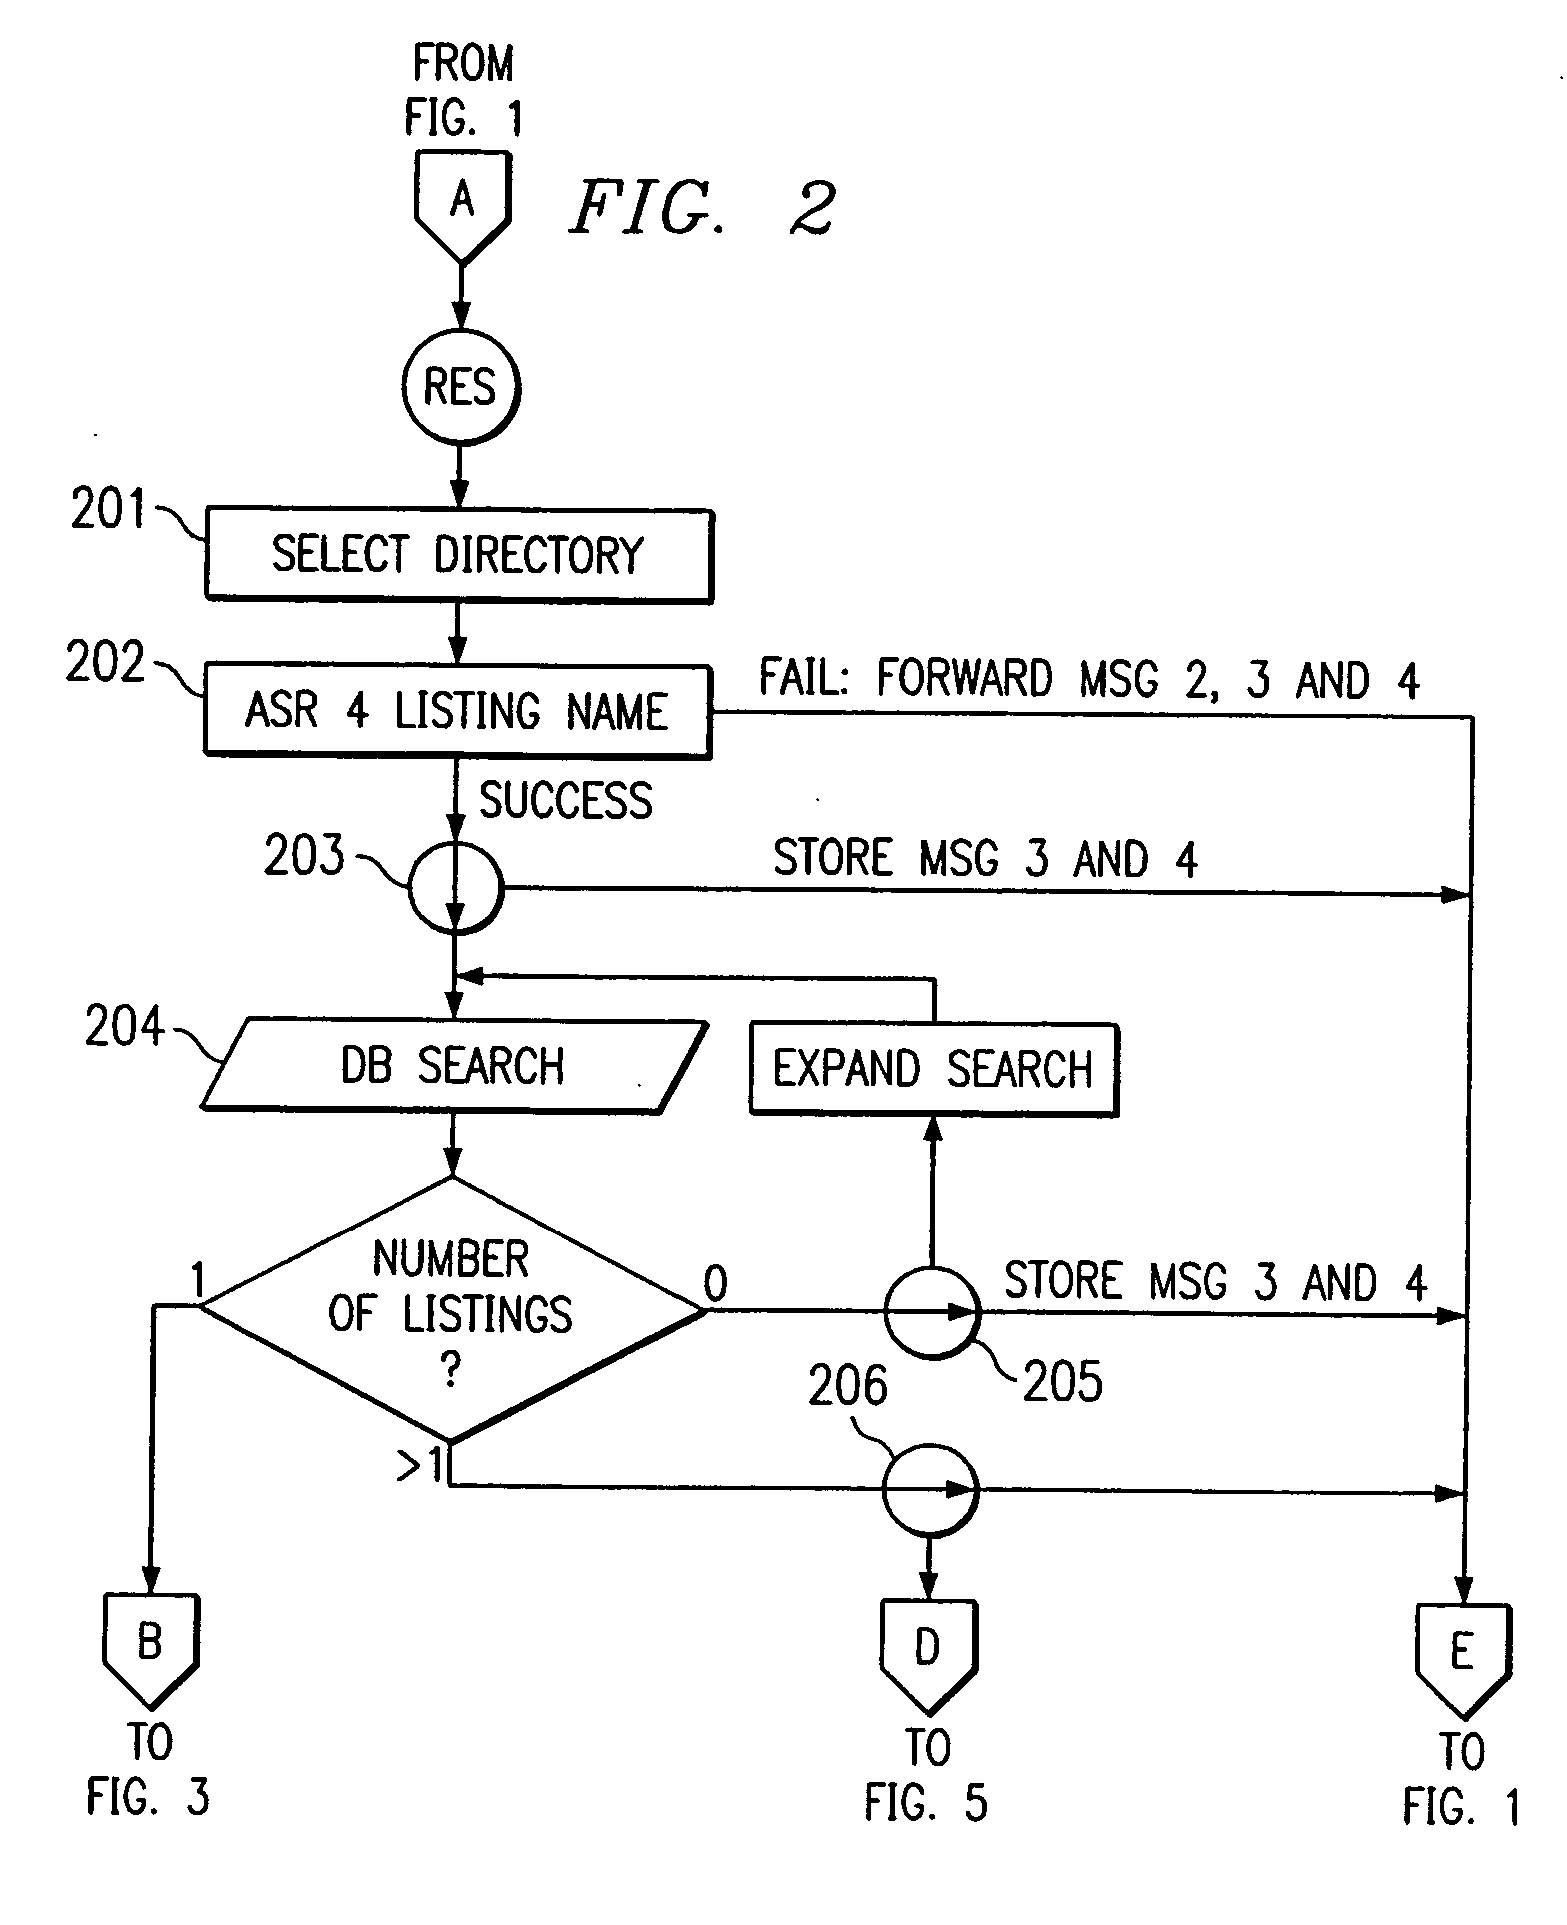 Directory assistance dialog with configuration switches to switch from automated speech recognition to operator-assisted dialog